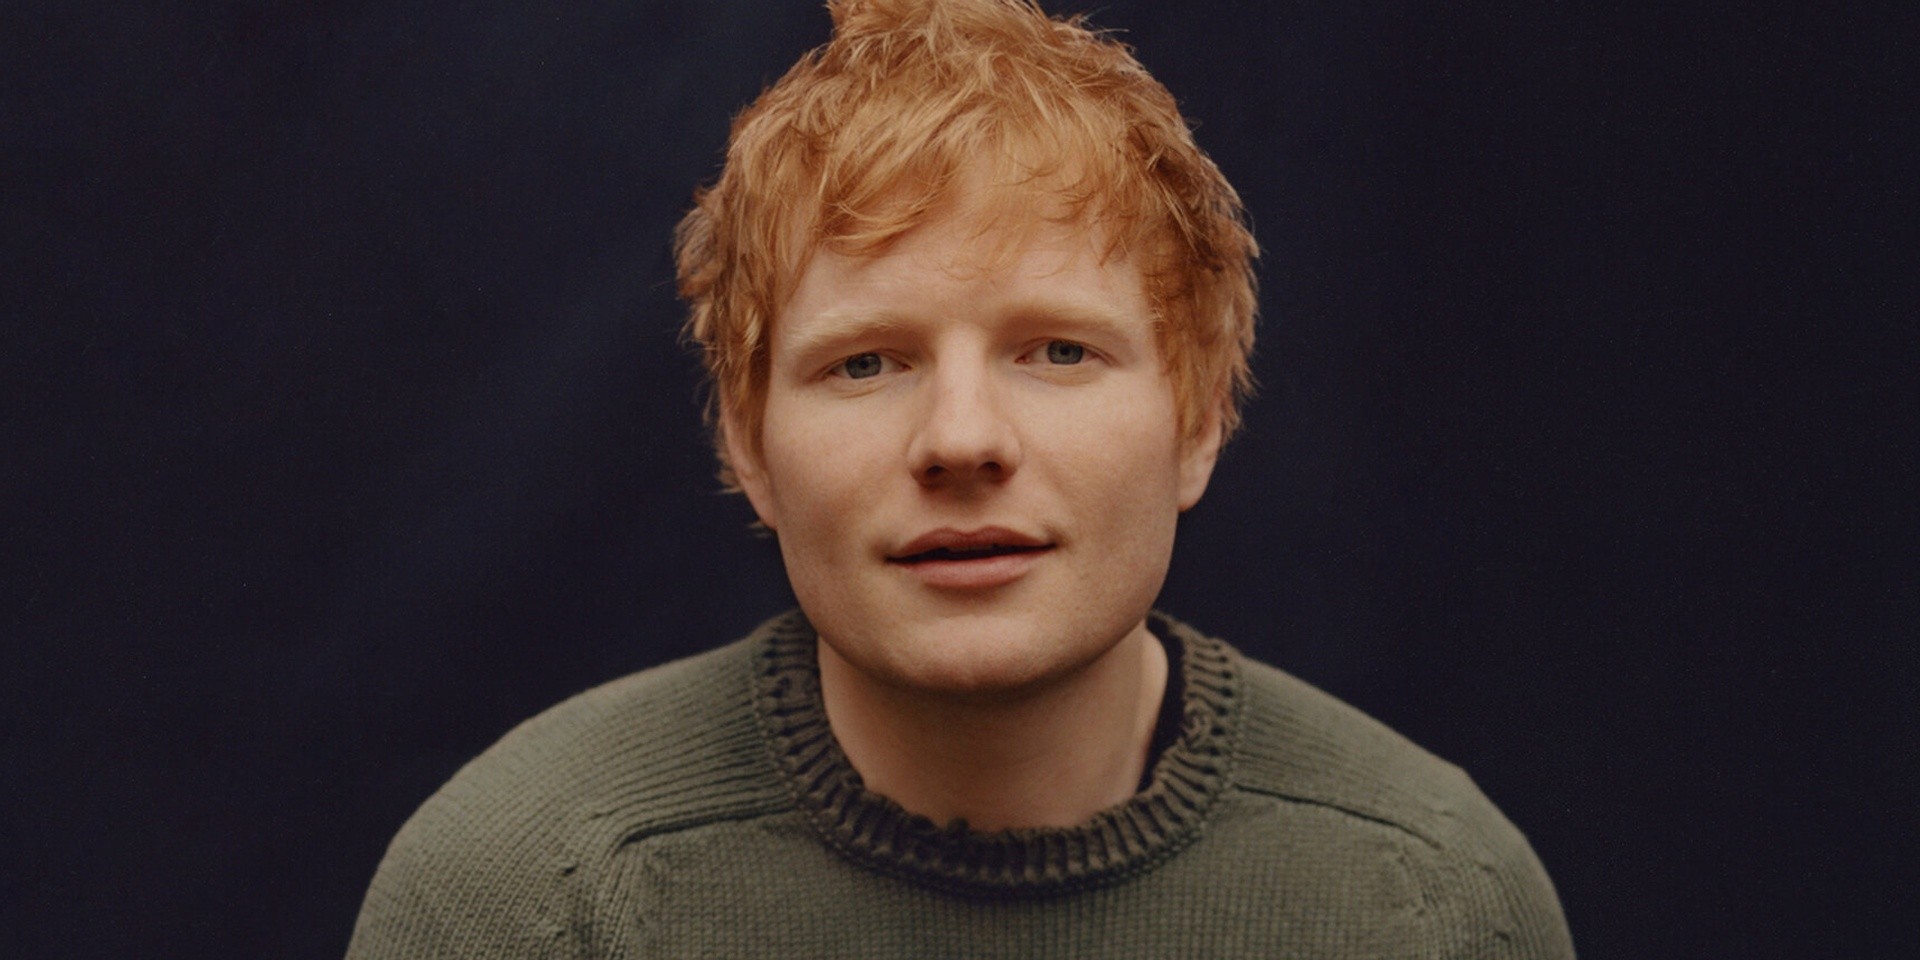 Here’s how you can watch Ed Sheeran's special performance on Philippine TV this weekend